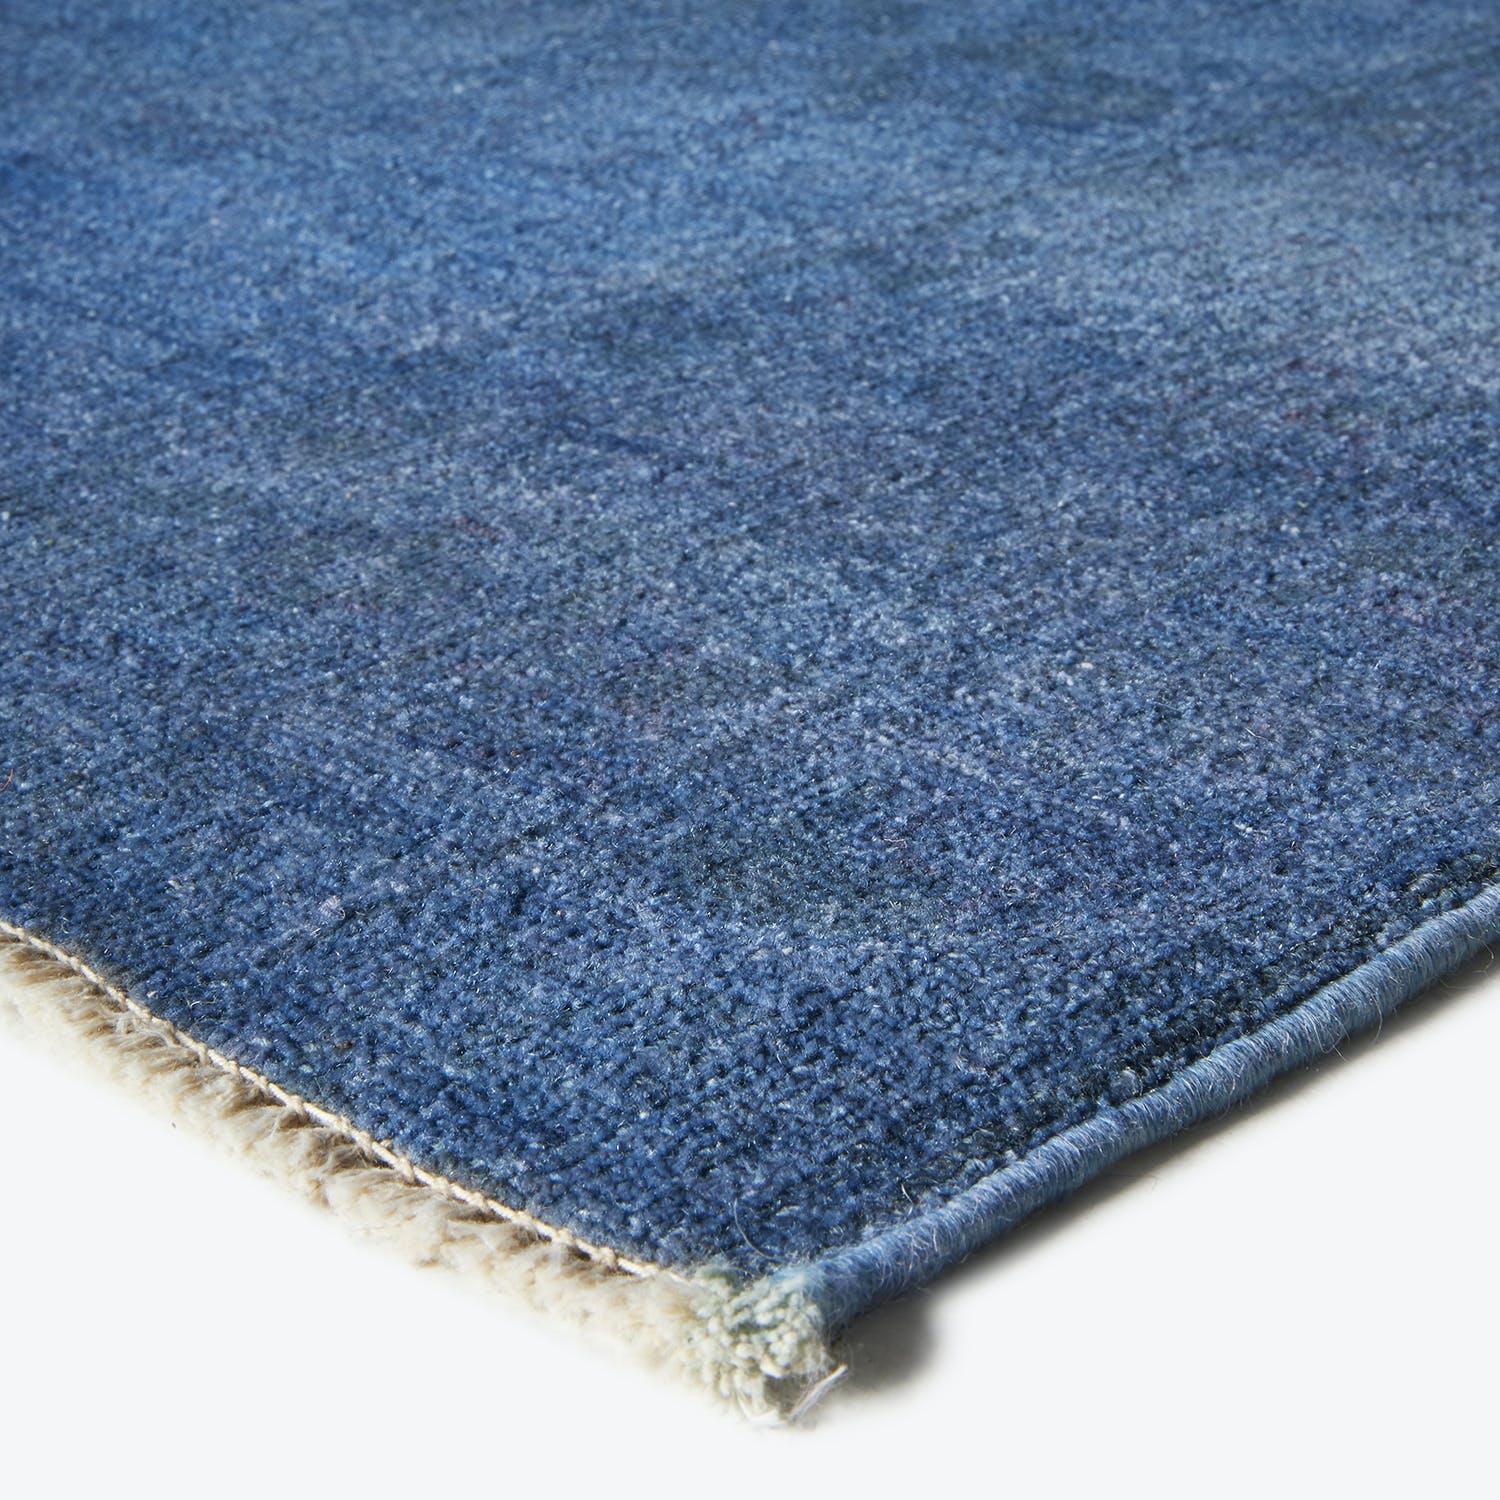 Close-up of a plush, high-quality blue carpet with textured fibers.